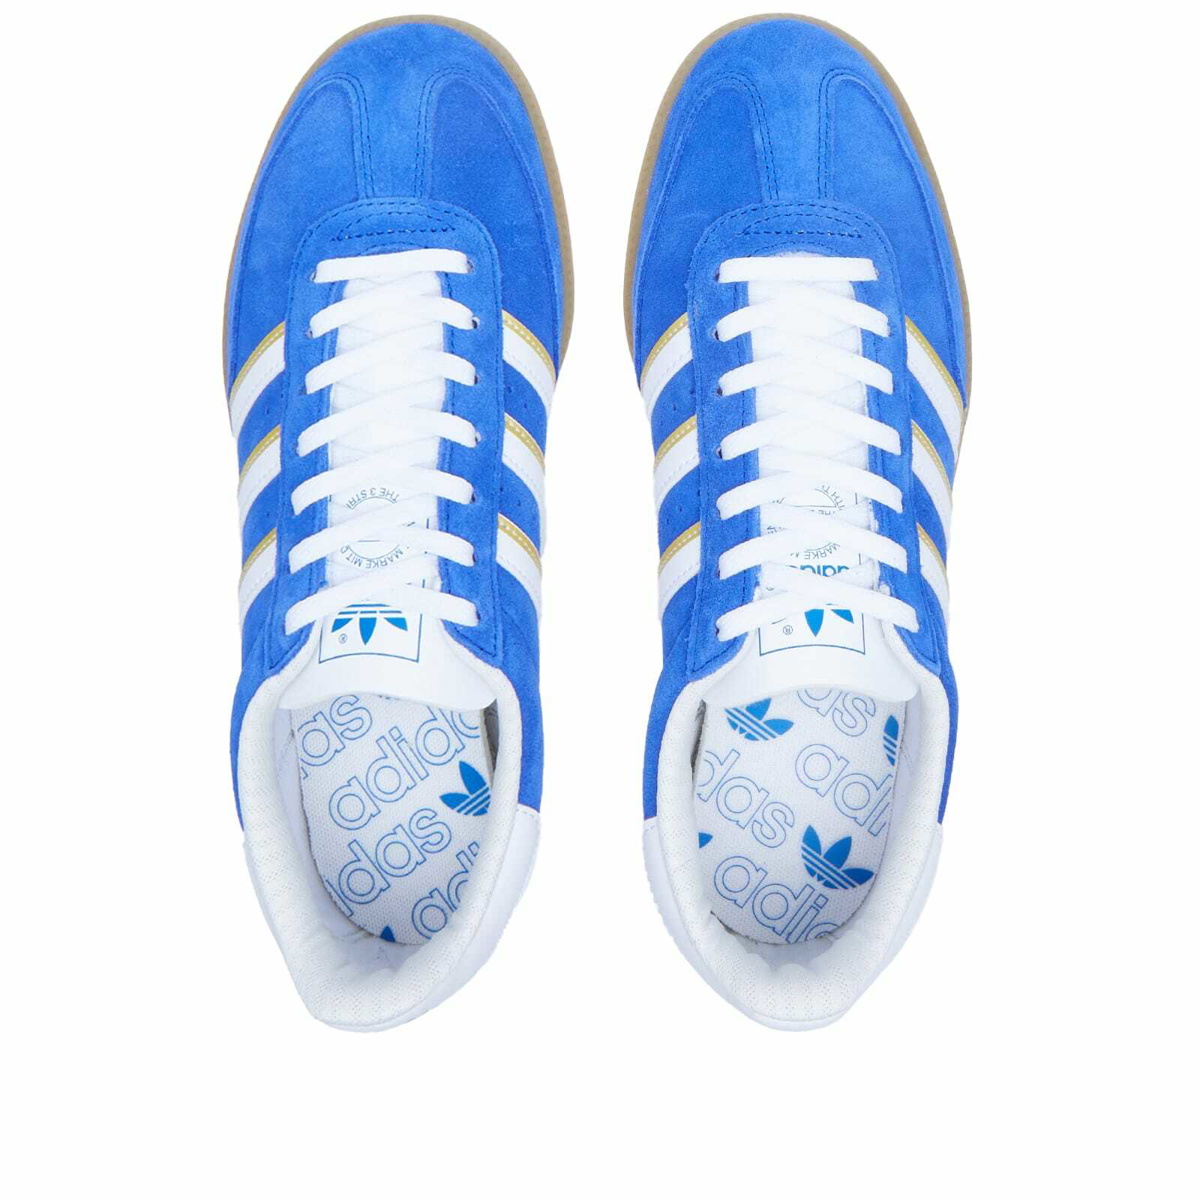 Adidas Hand 2 Sneakers in Semi Lucid Blue/White adidas